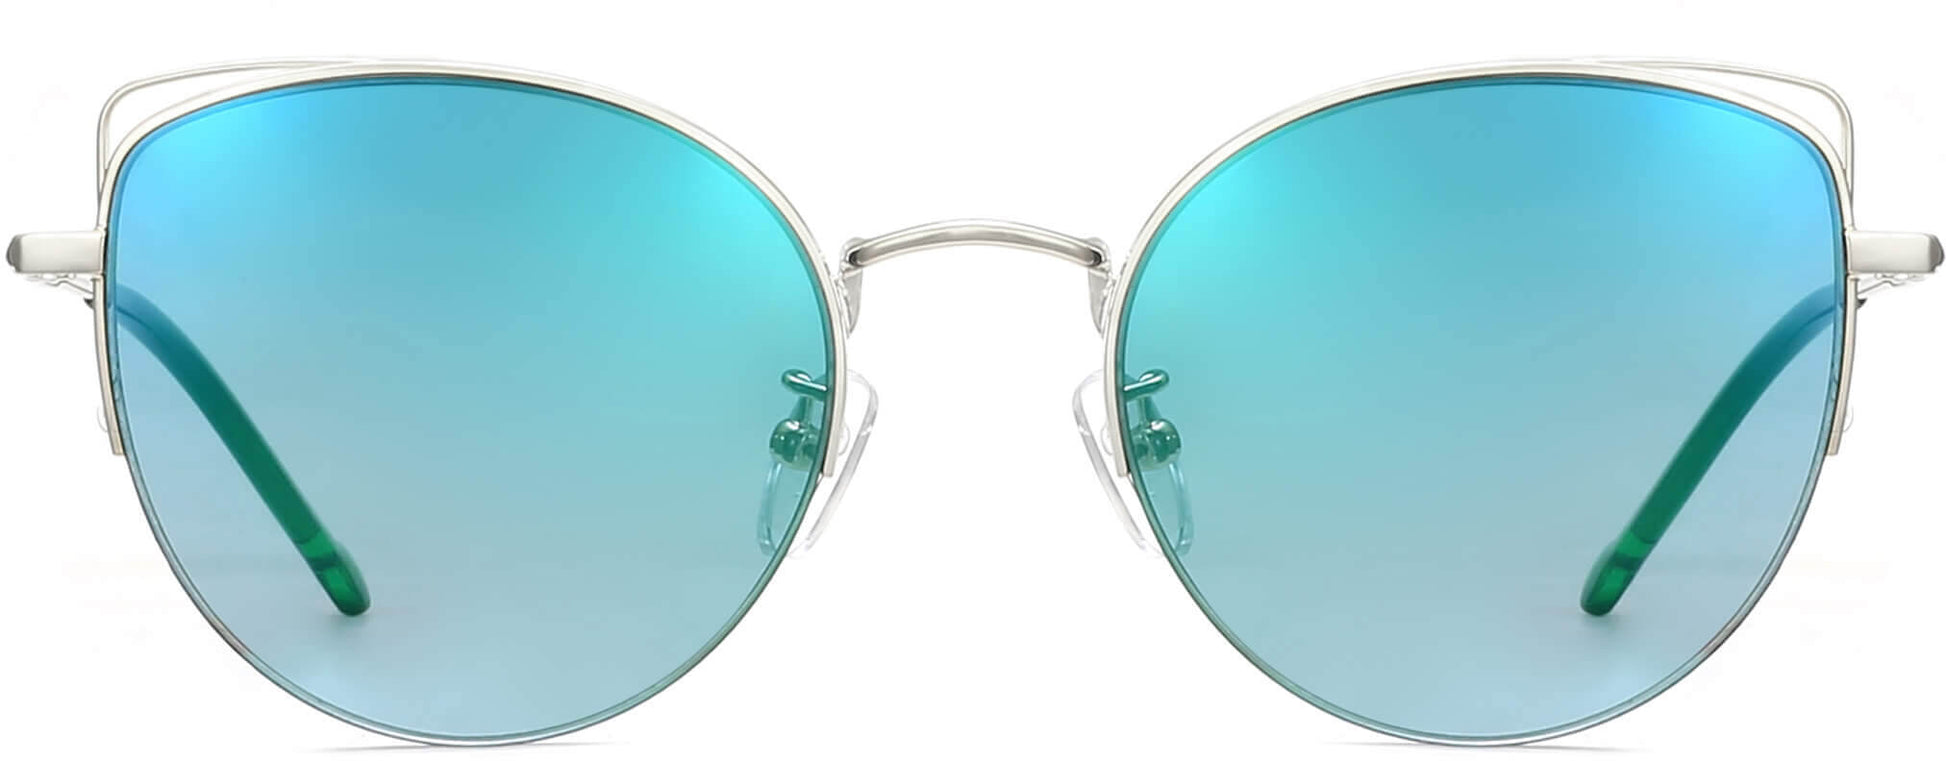 Zosia Green Stainless steel Sunglasses from ANRRI, front view